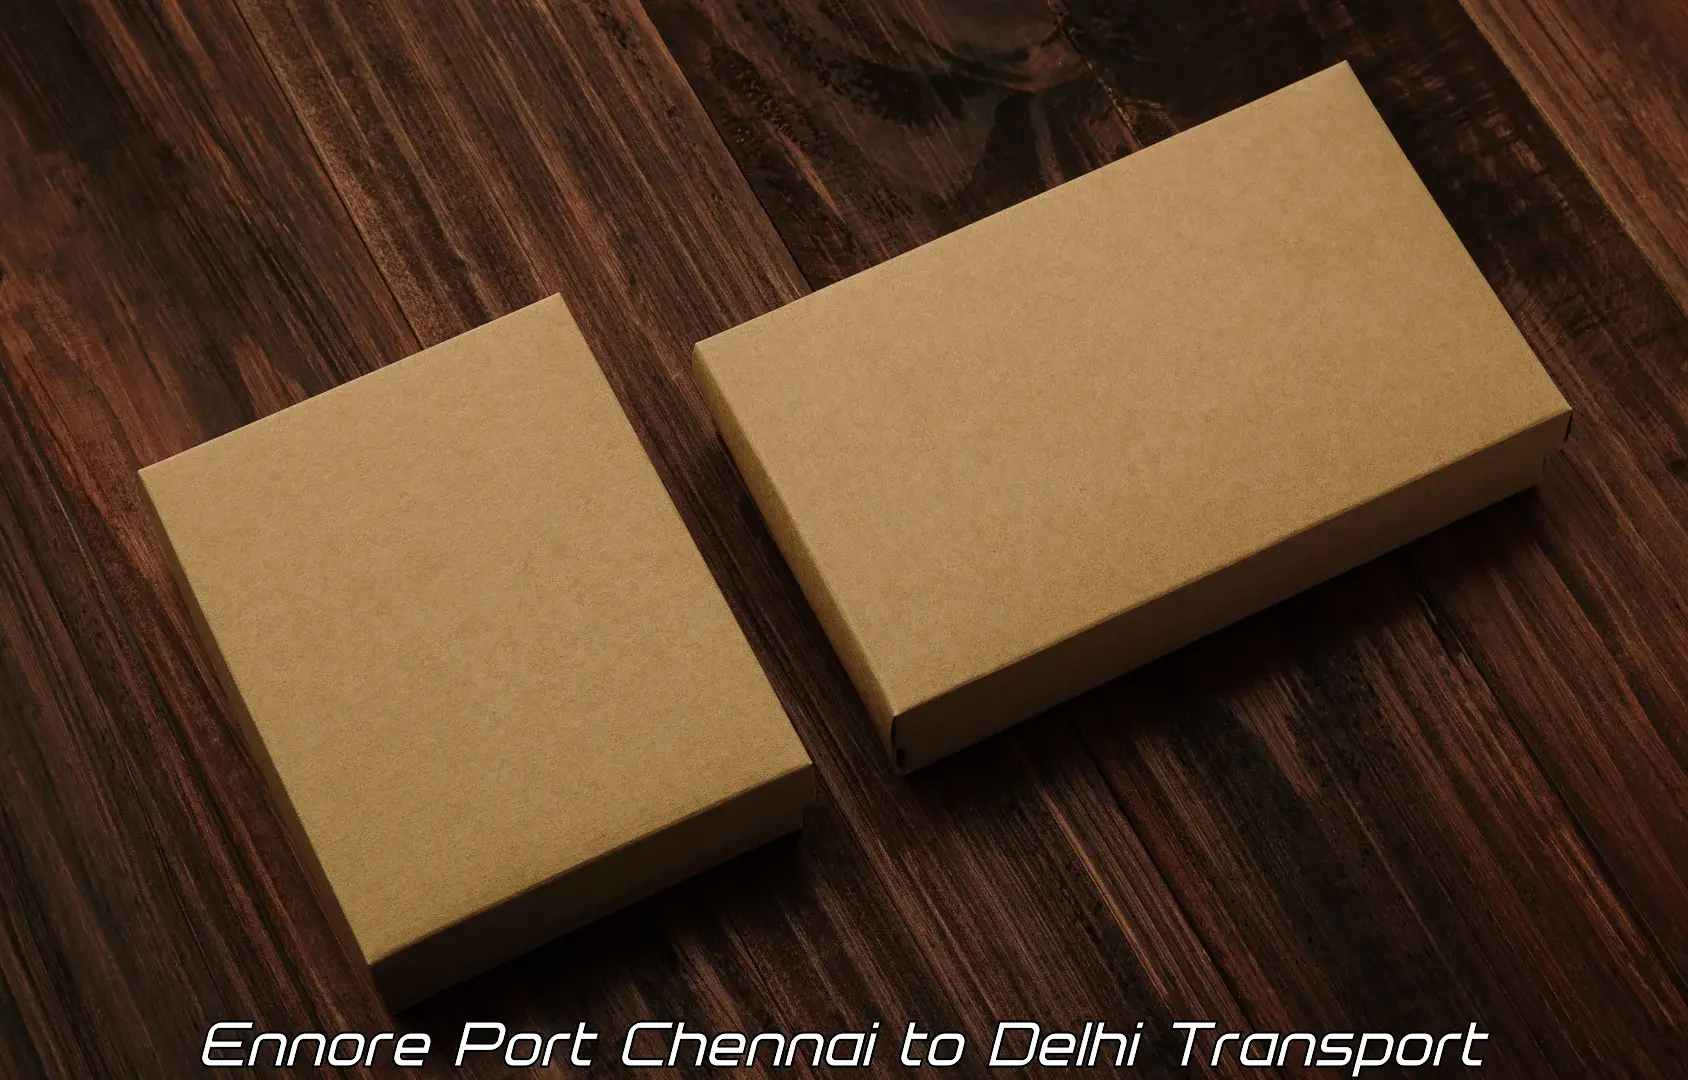 Pick up transport service Ennore Port Chennai to NCR